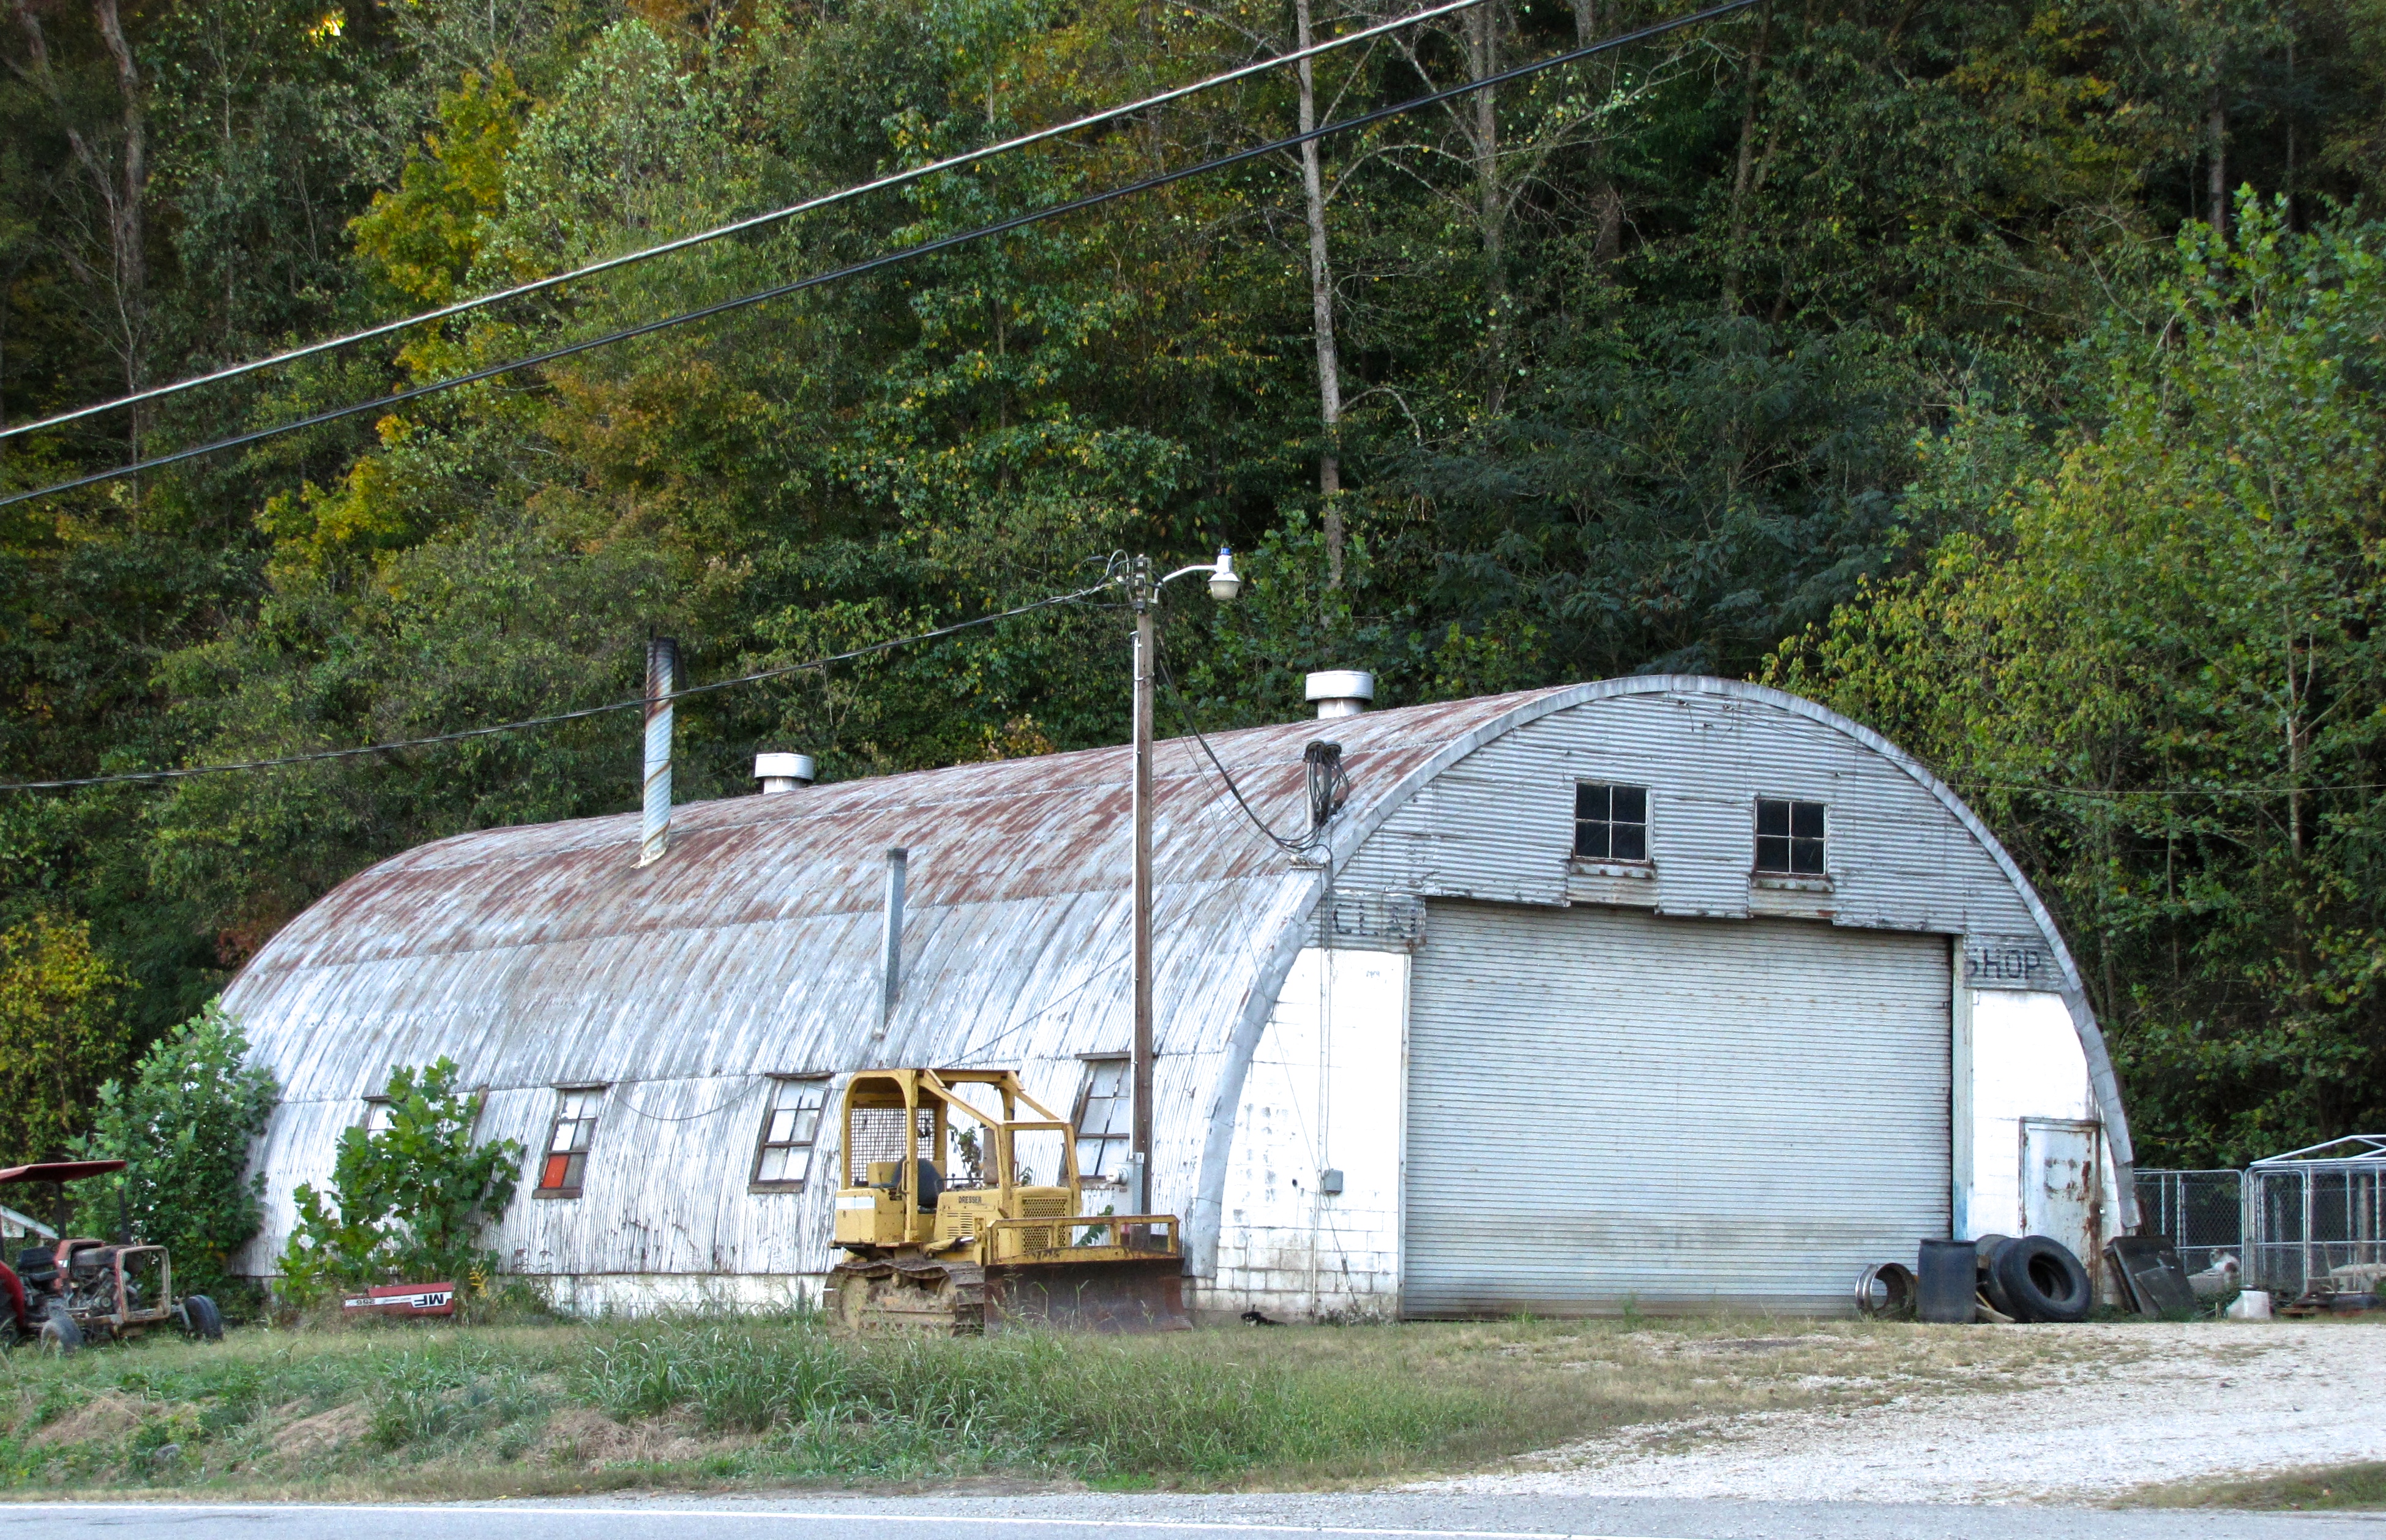 quonset hut in Kingsville, MD